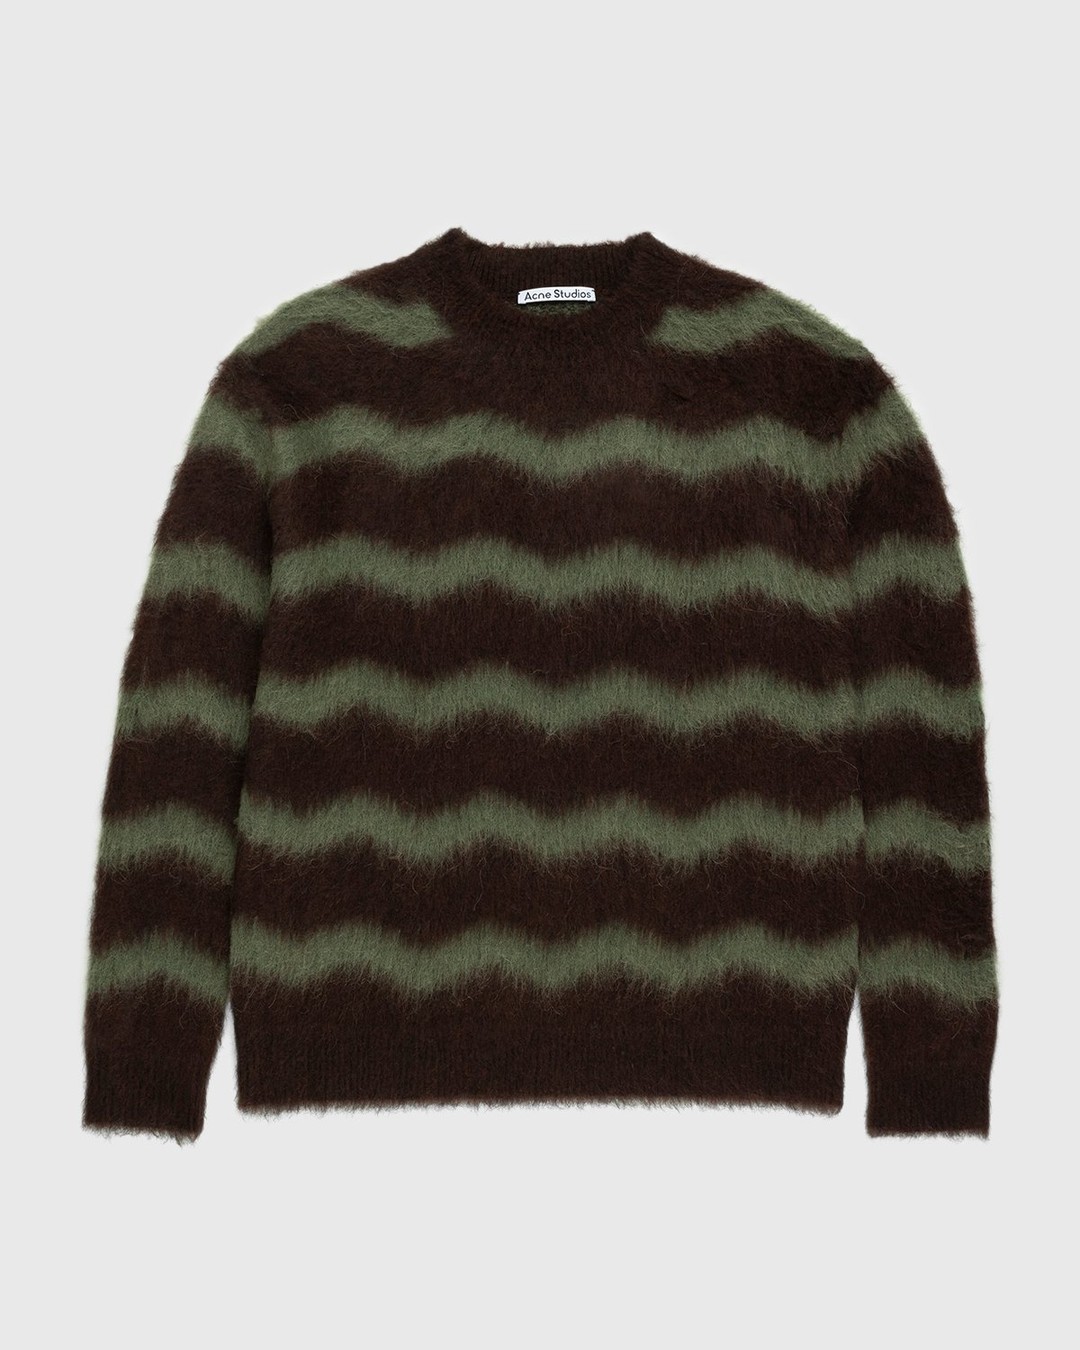 Acne Studios – Striped Fuzzy Sweater Brown/Military Green - Knitwear - Brown - Image 1